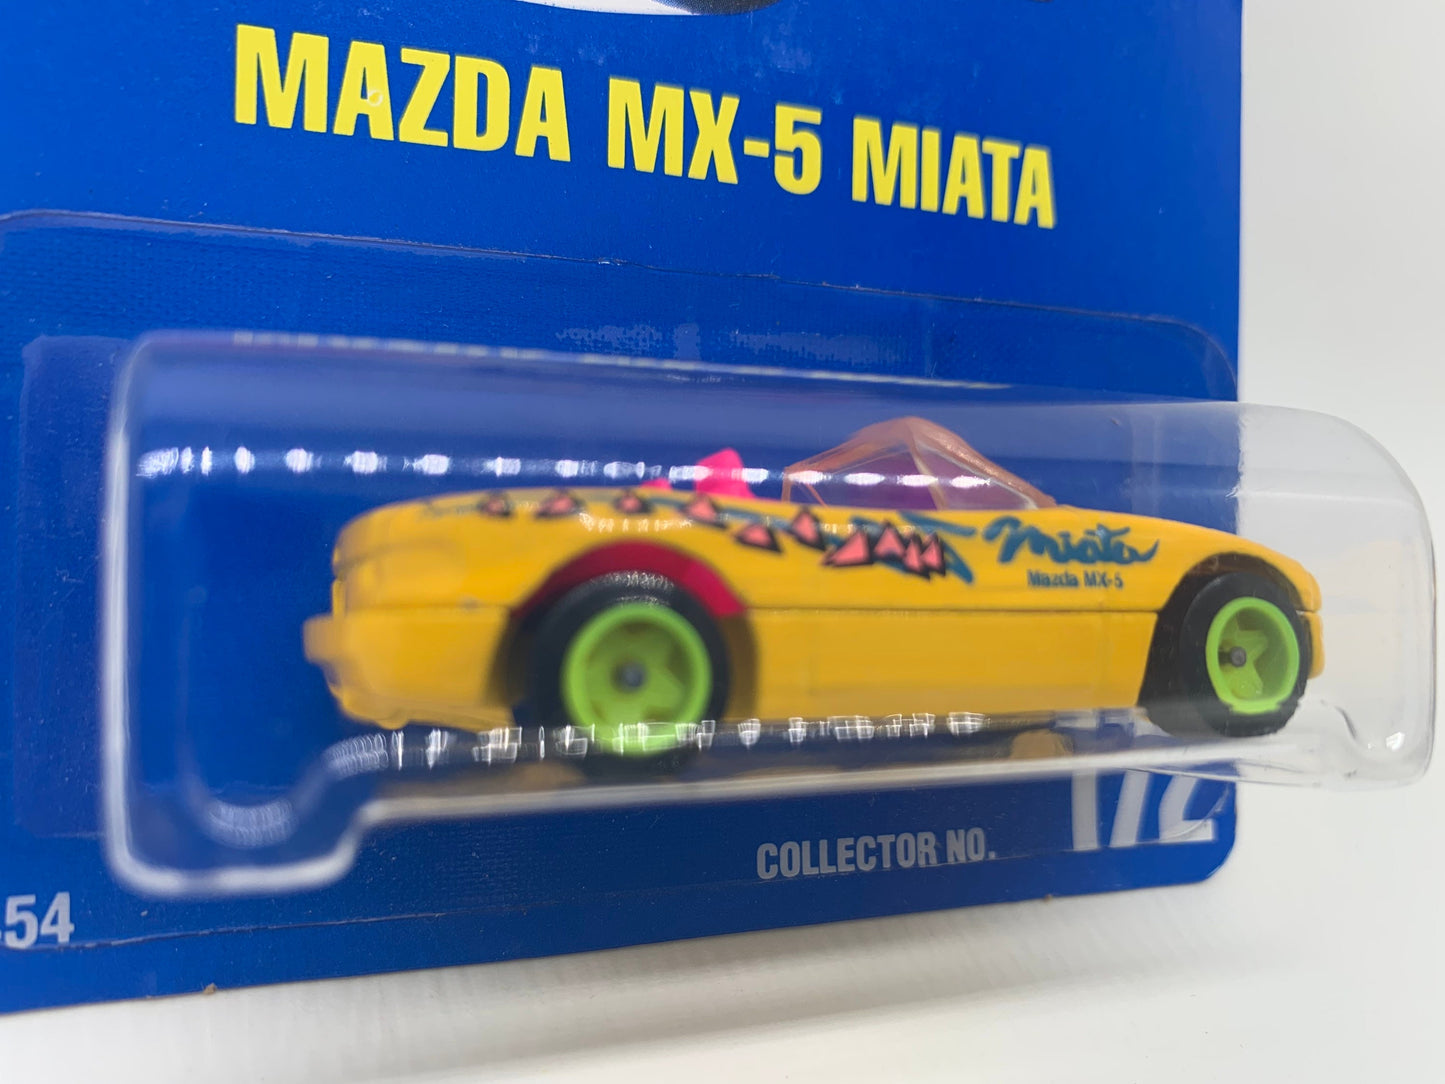 Hot Wheels Mazda MX-5 Miata Yellow Collectable Miniature Scale Model Toy Car Perfect Birthday Gift